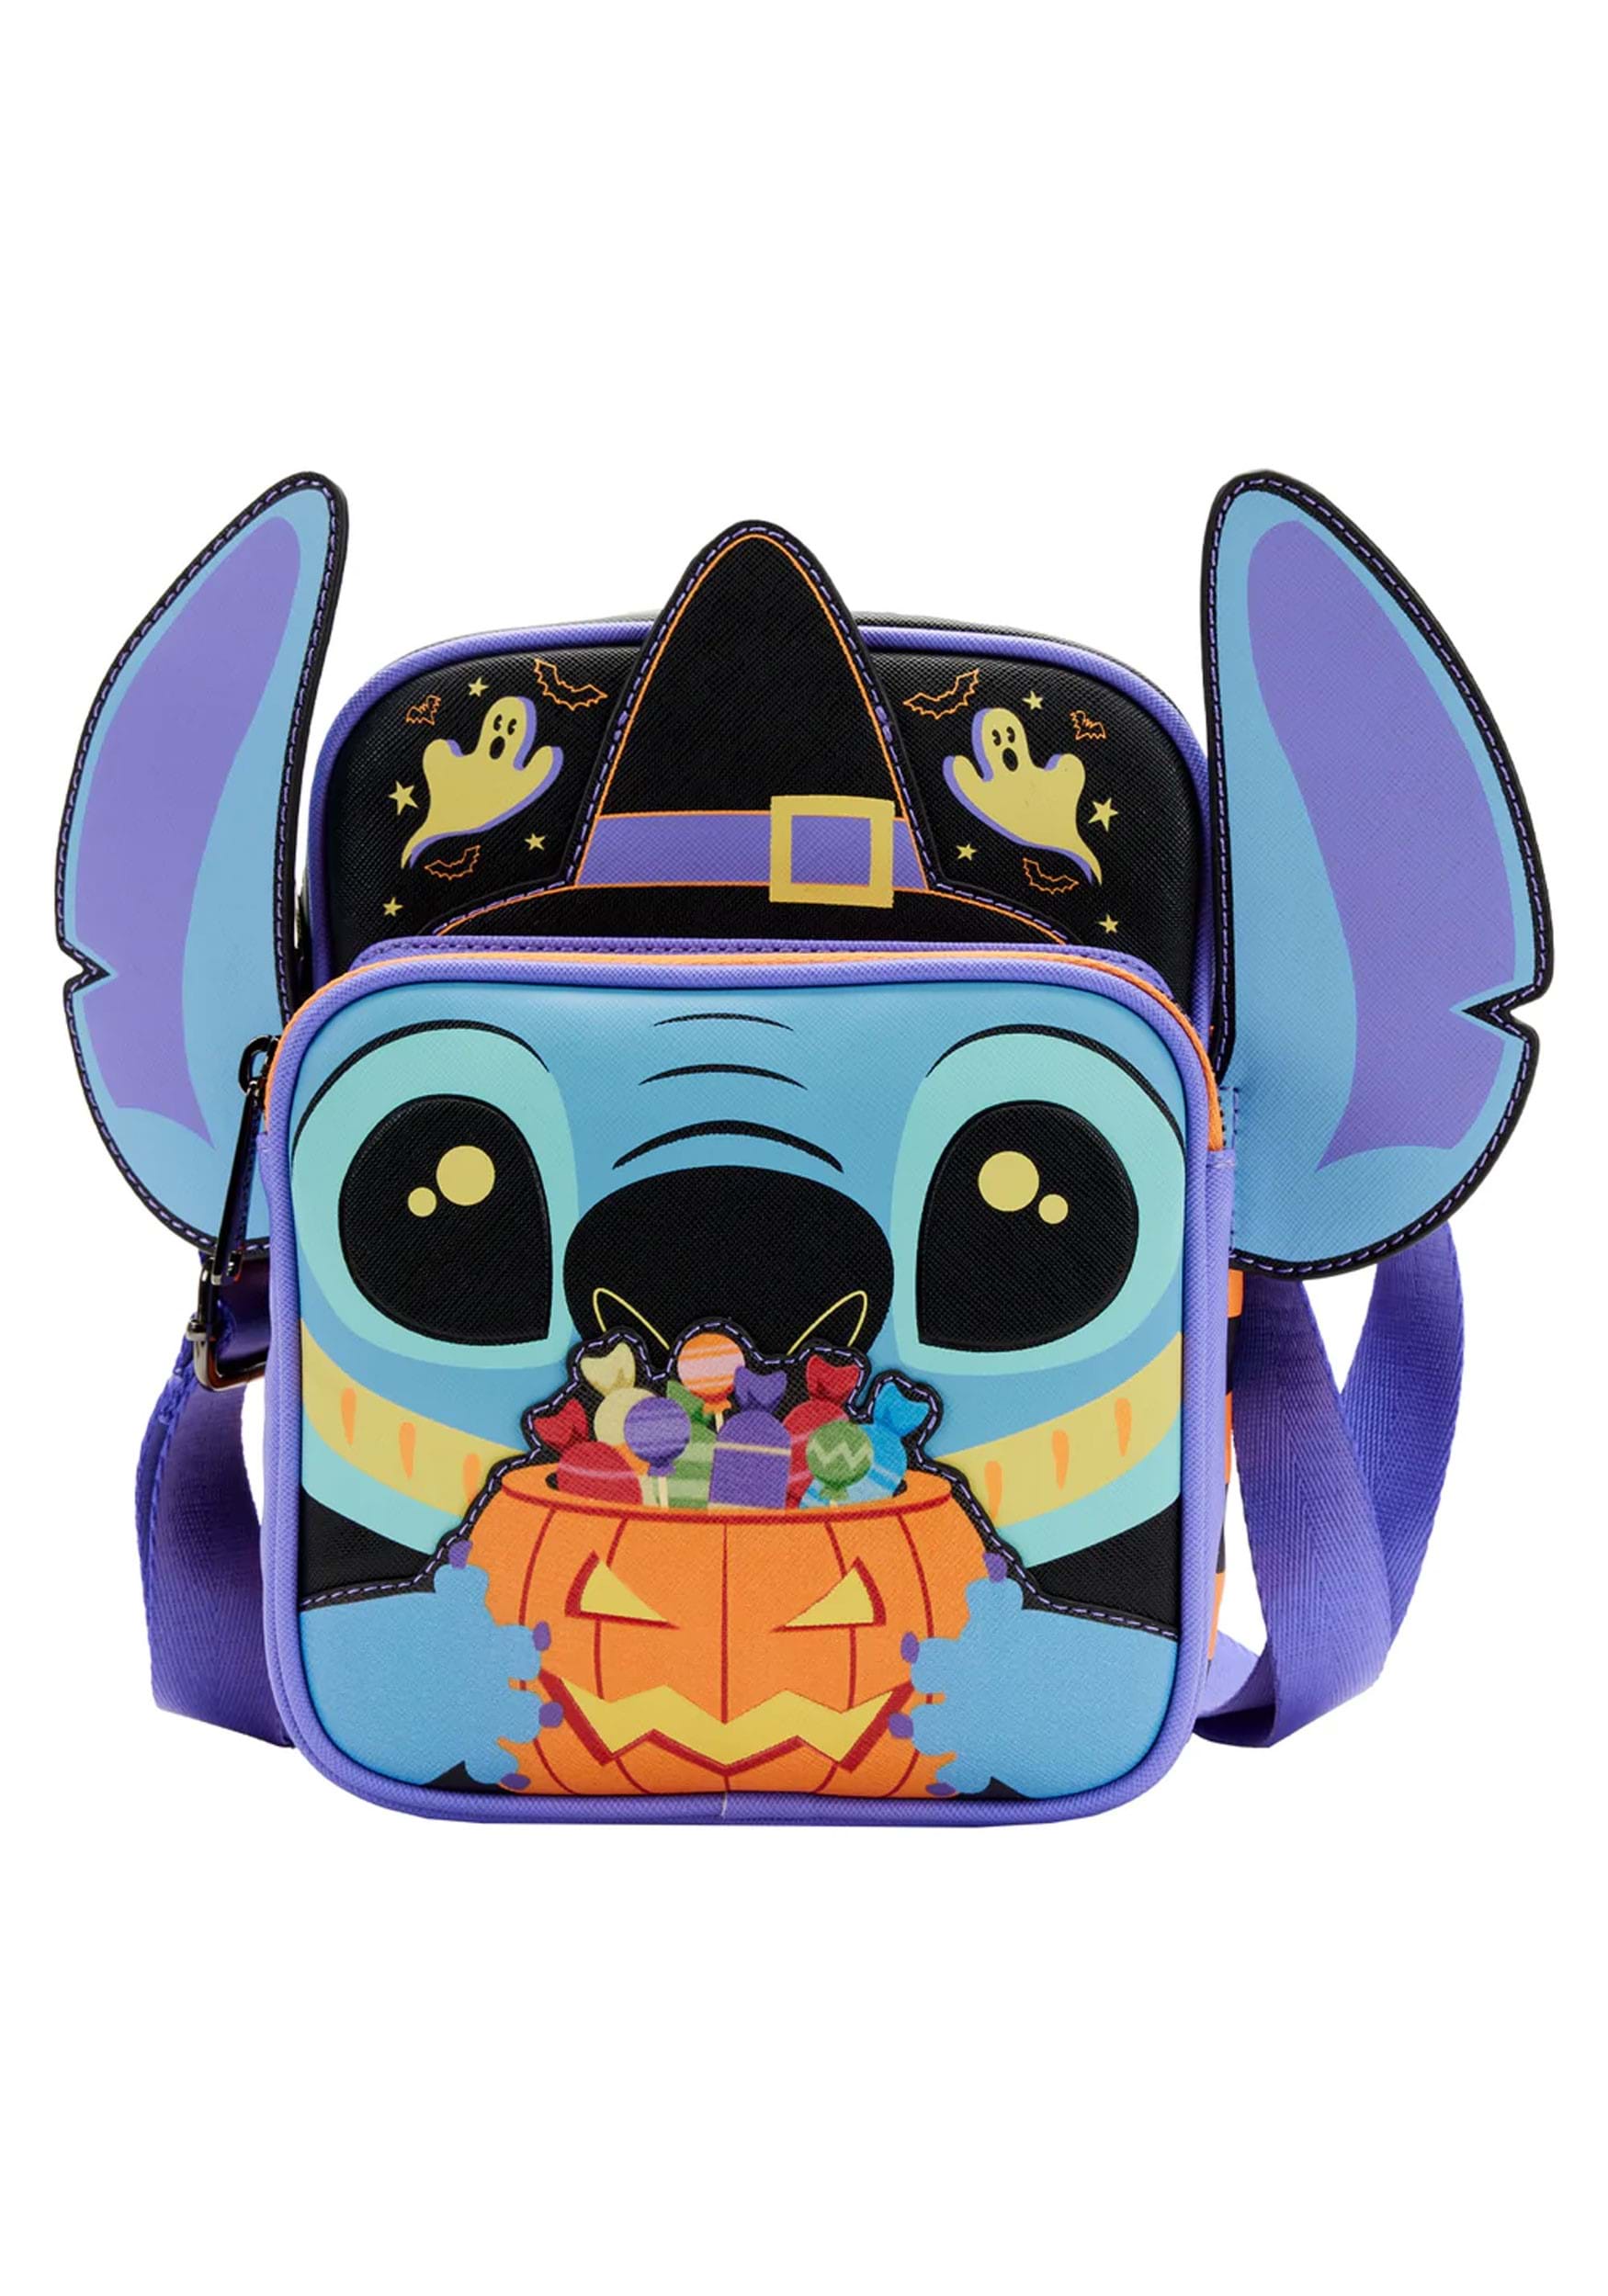 Image of Loungefly Disney Lilo and Stitch Glow Halloween Candy Cosplay Passport Bag ID LFWDTB2640-ST